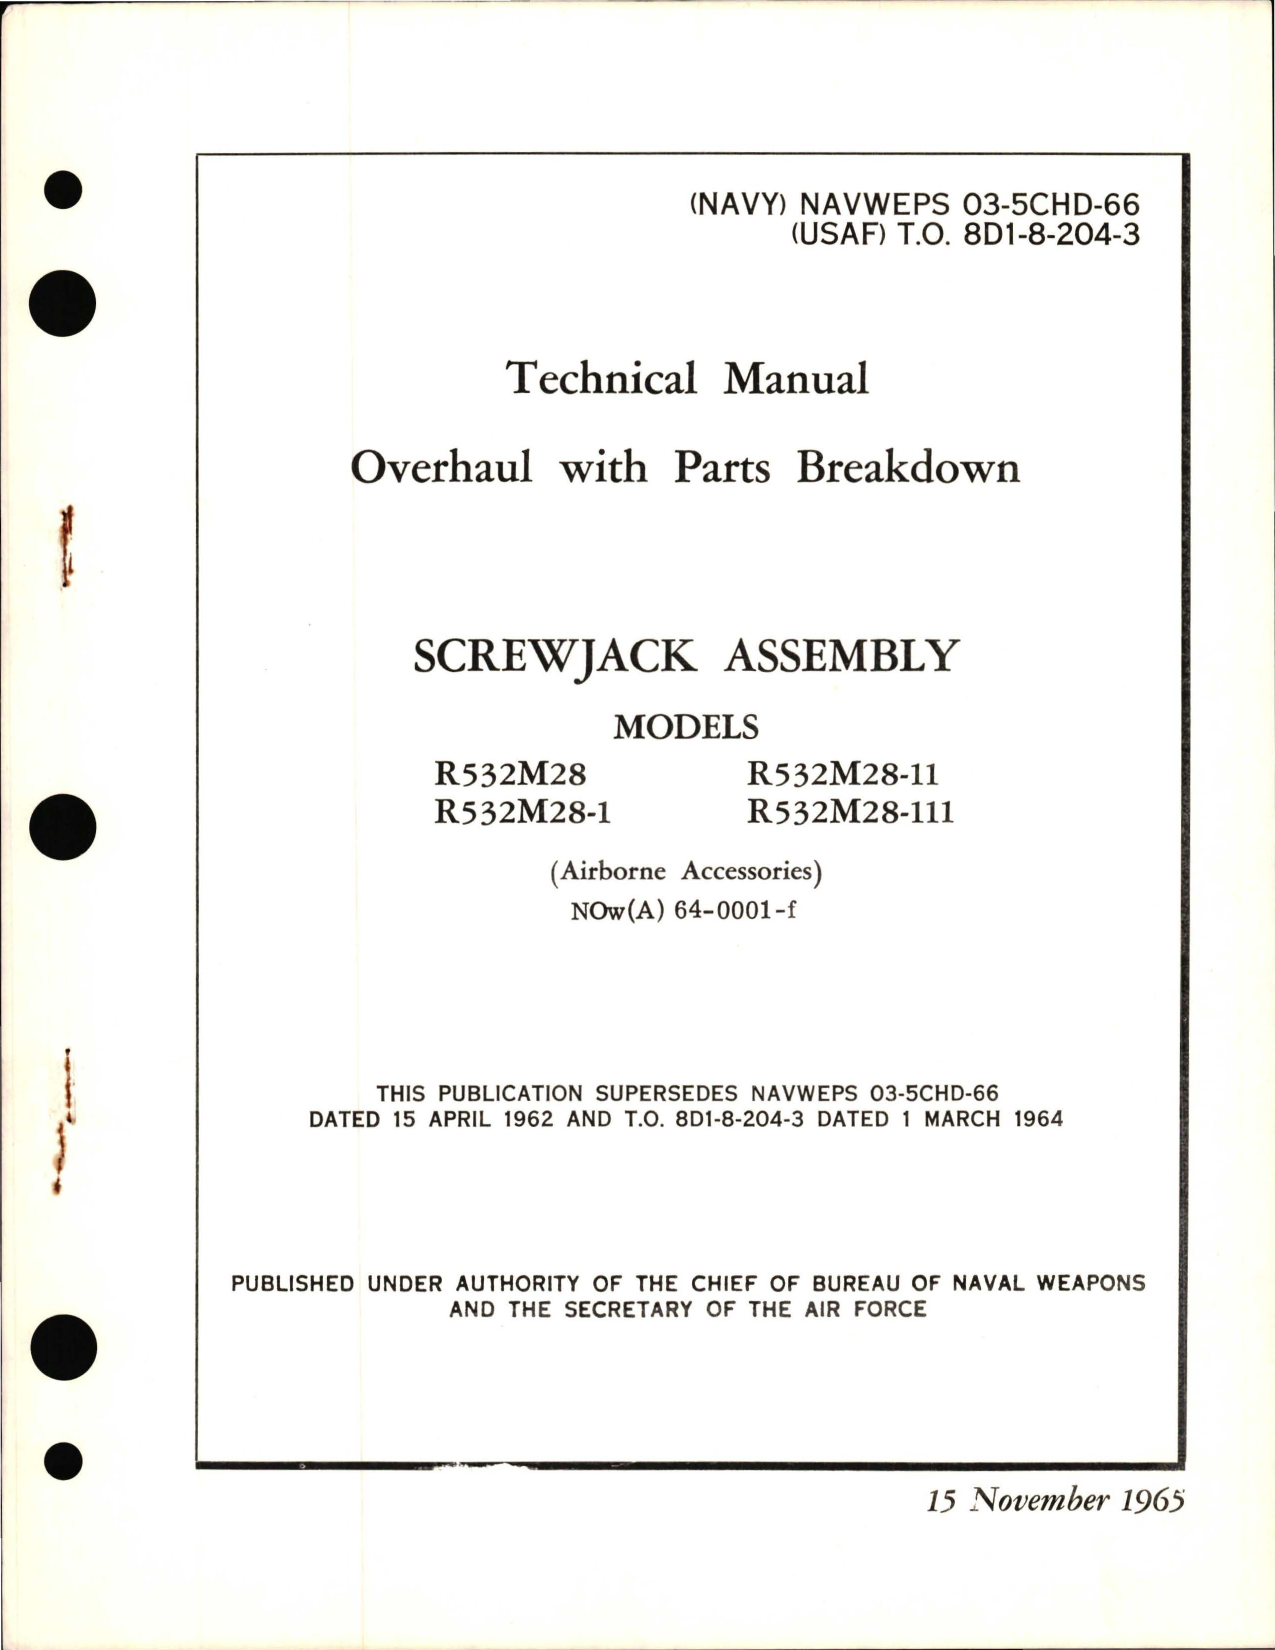 Sample page 1 from AirCorps Library document: Overhaul with Parts Breakdown for Screwjack Assembly Models R532M28, R532M28-1, R532M28-11, and R532M28-111  